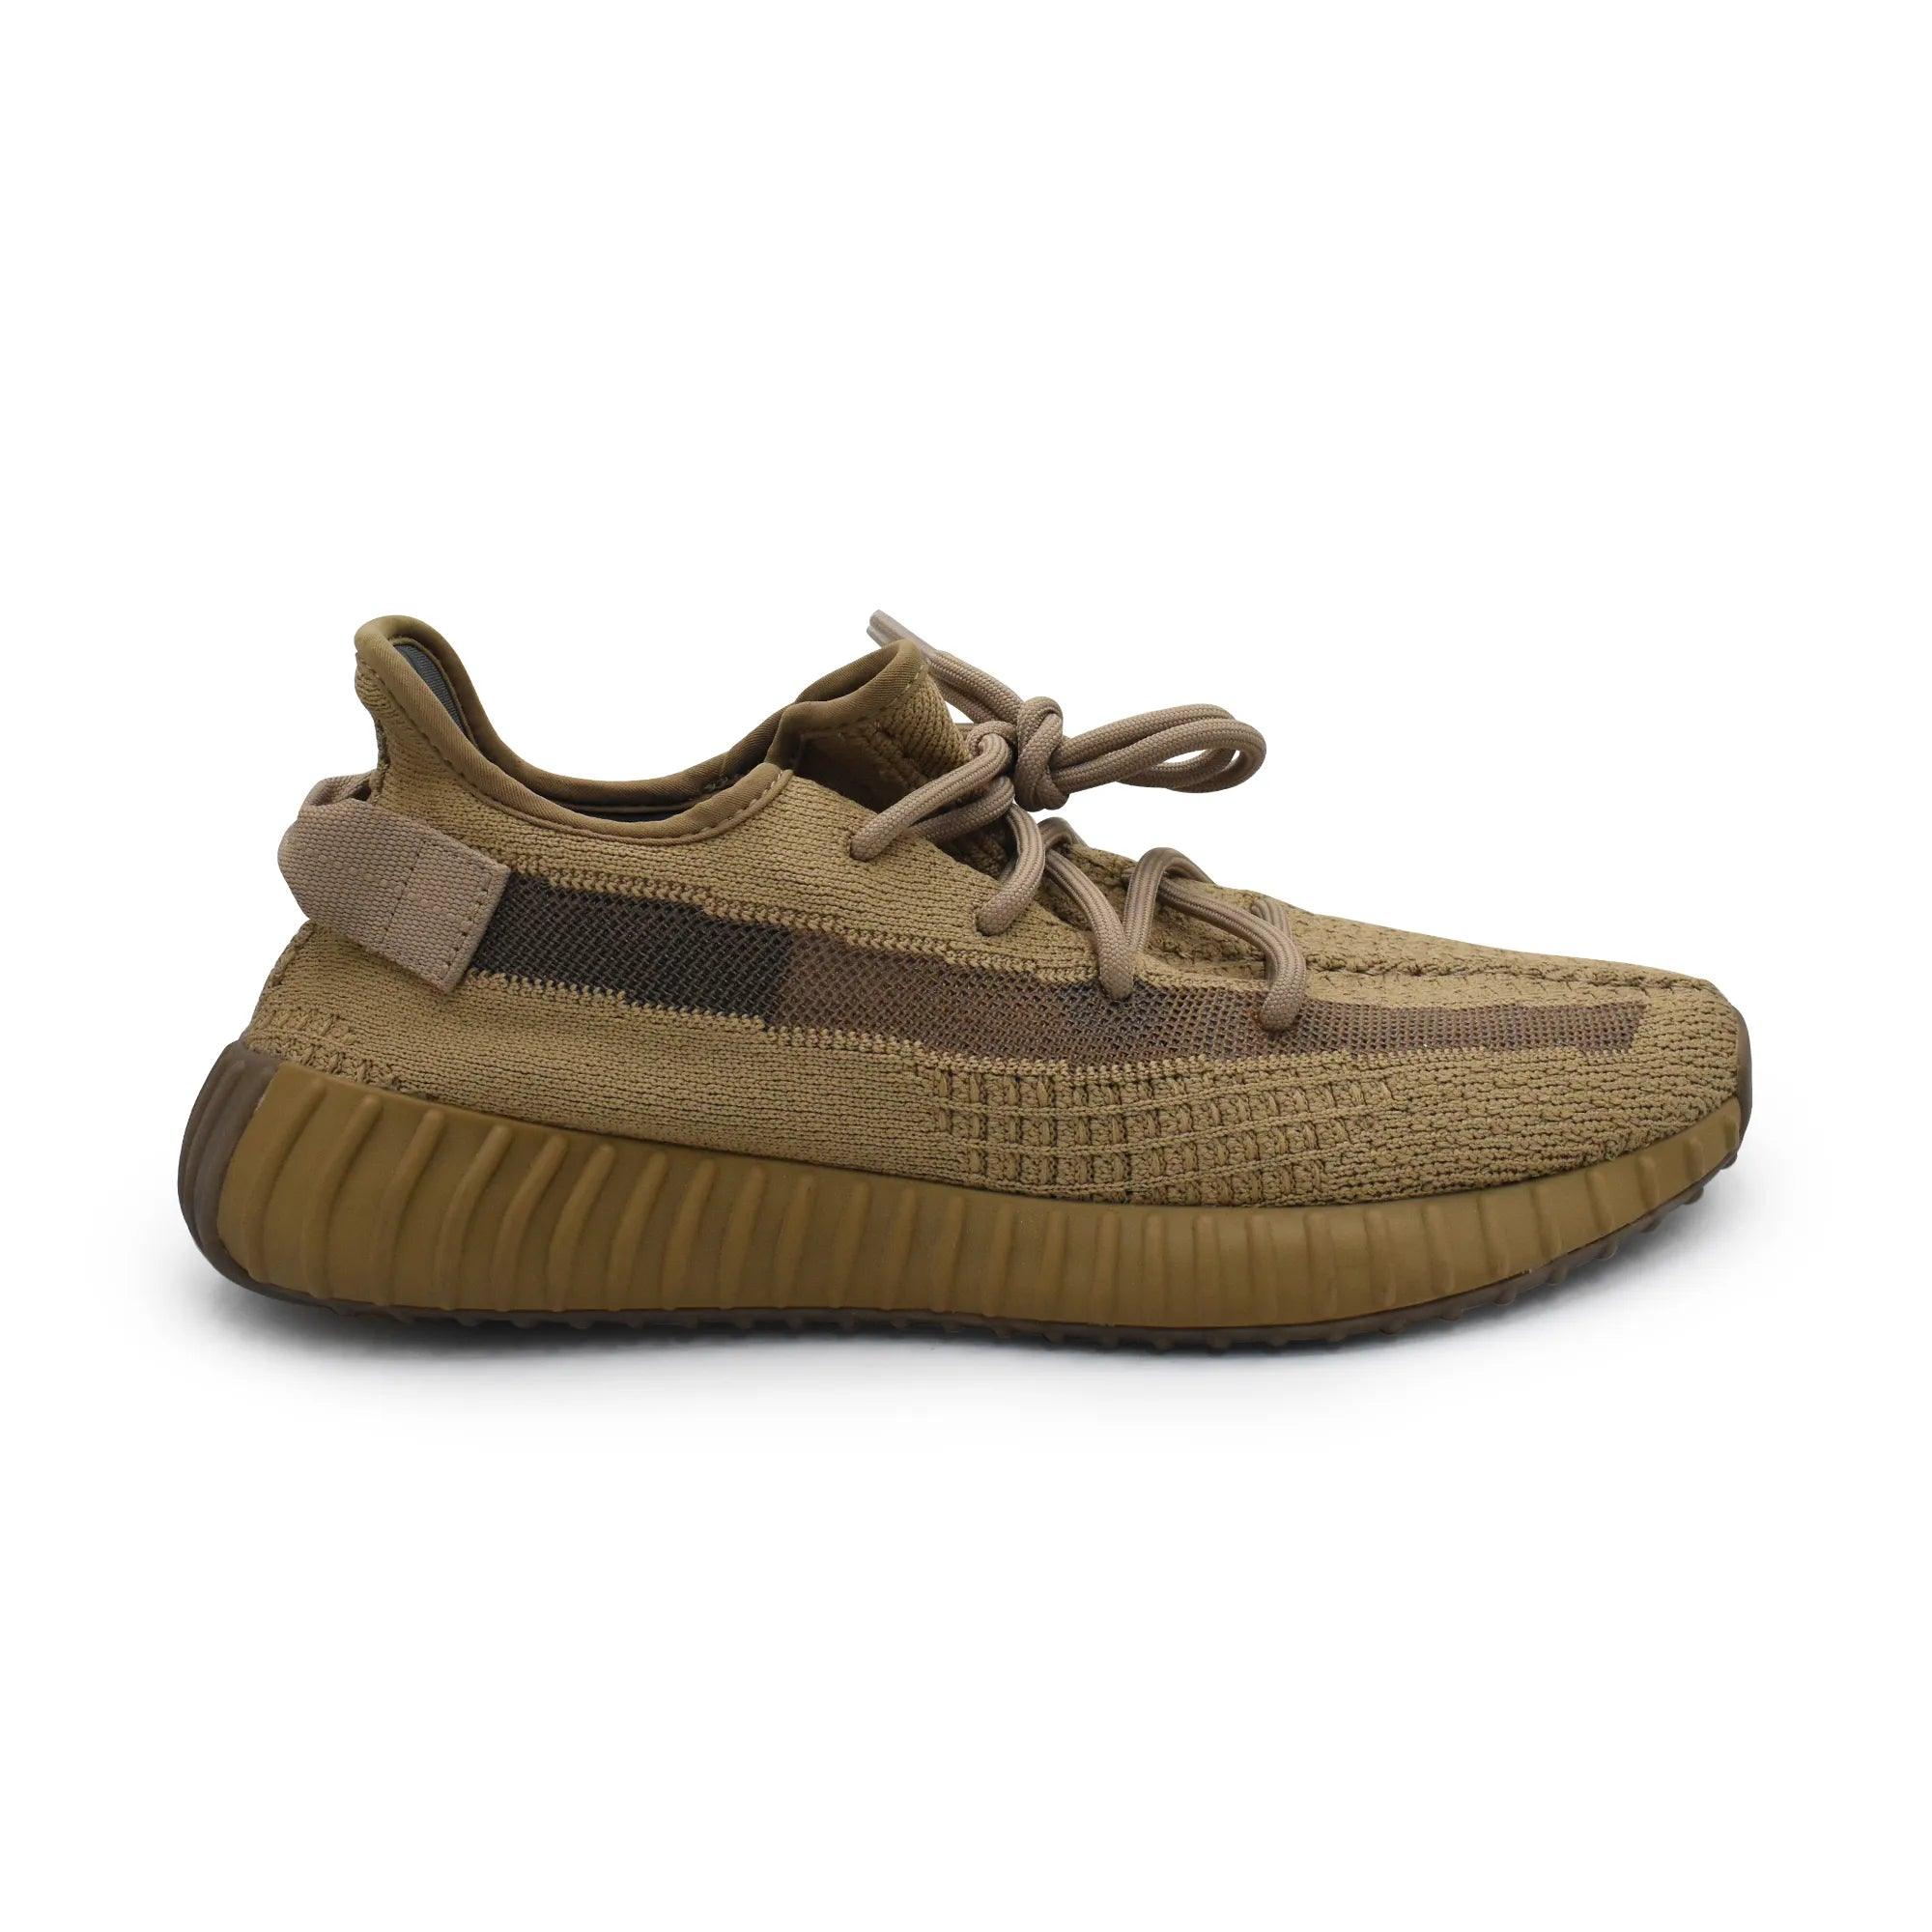 Yeezy 'Boost 350 V2 Earth' Sneakers - Men's 9 - Fashionably Yours